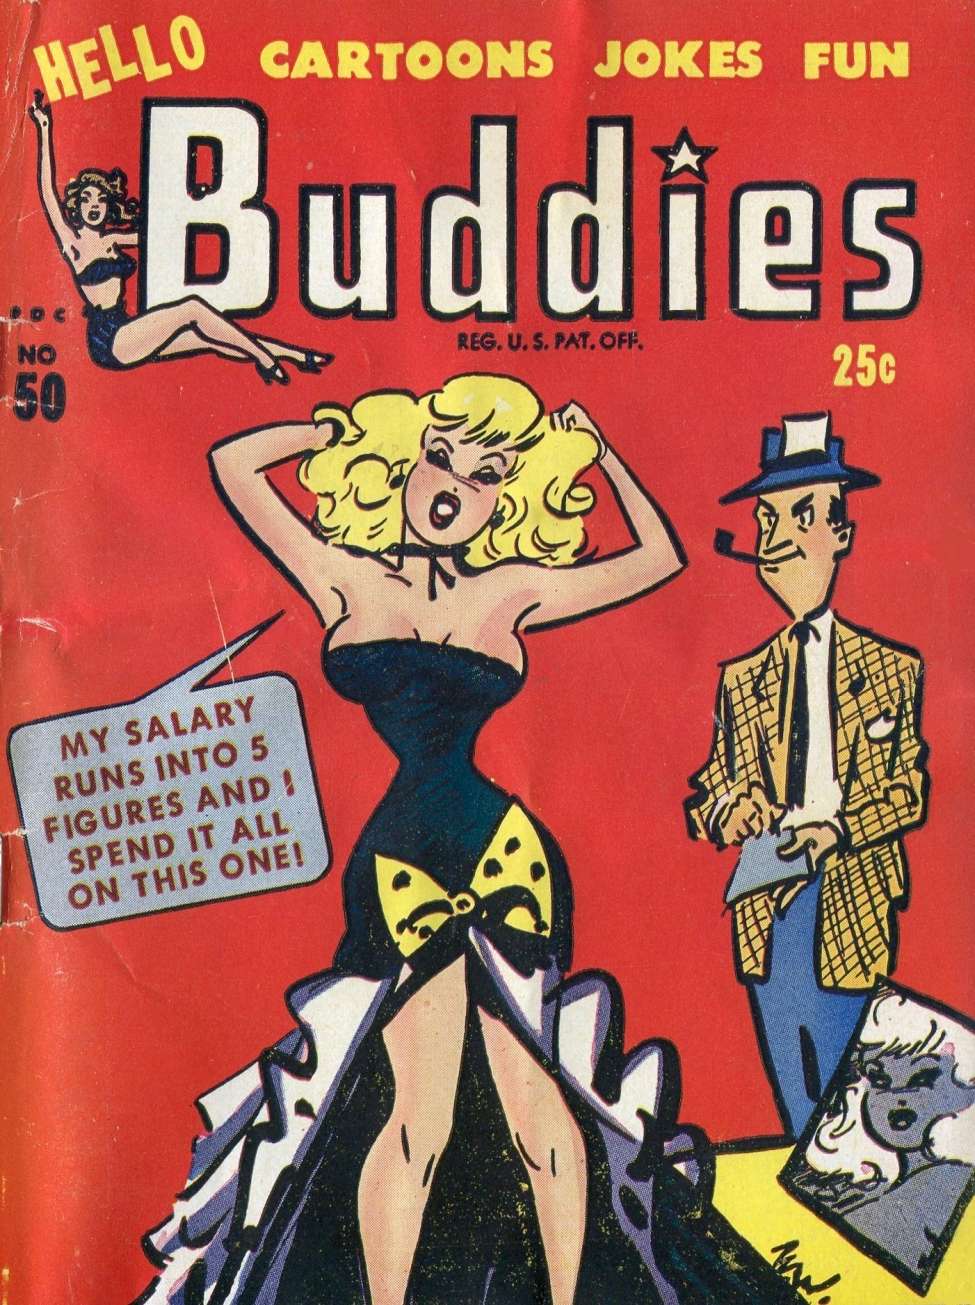 Comic Book Cover For Hello Buddies 50